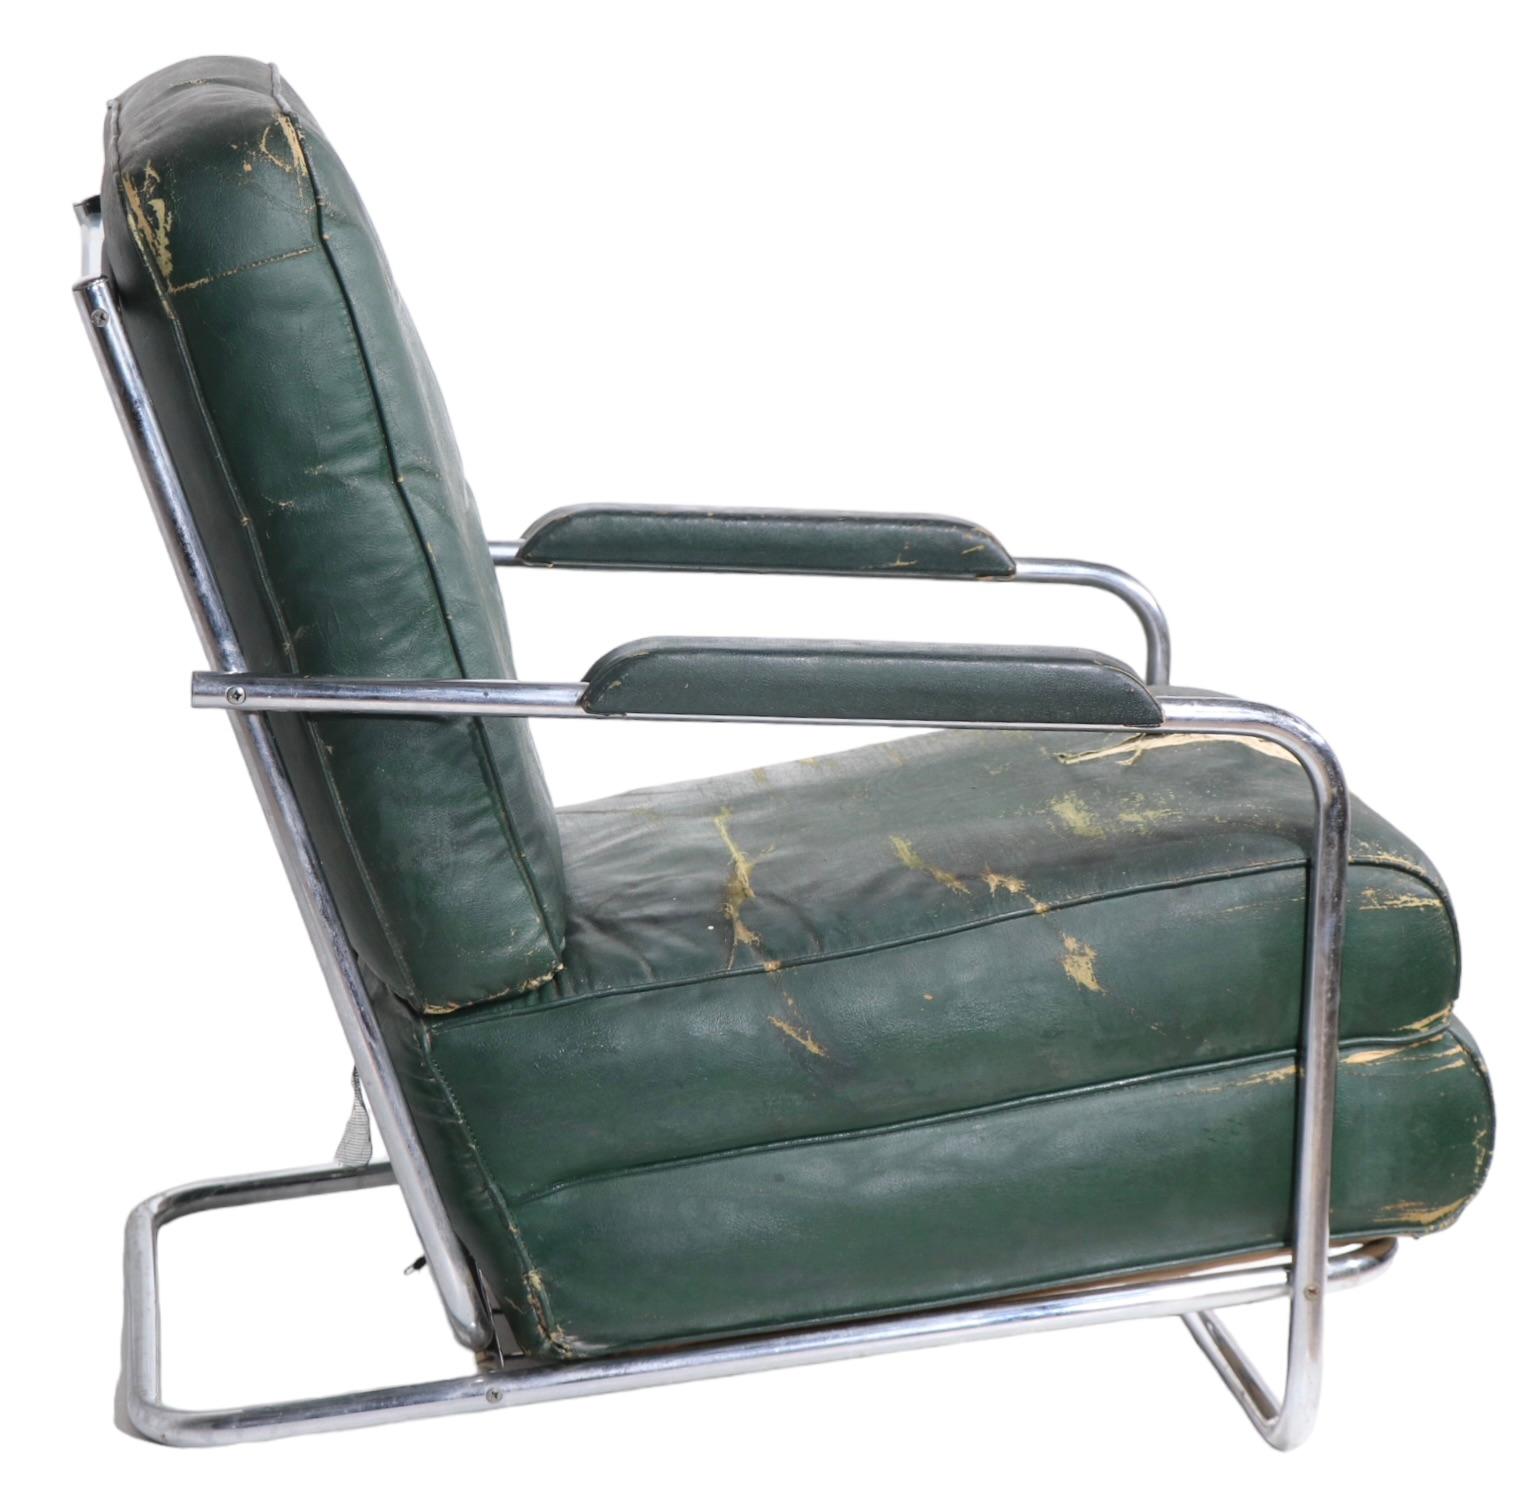 Iconic Art Deco, Machine Age lounge chair designed by Gilbert Rohde for the Troy Sunshade Company circa 1930's. The chair features a sexy tubular chrome frame with large upholstered cushions,  the original oil cloth fabric  shows significant wear,